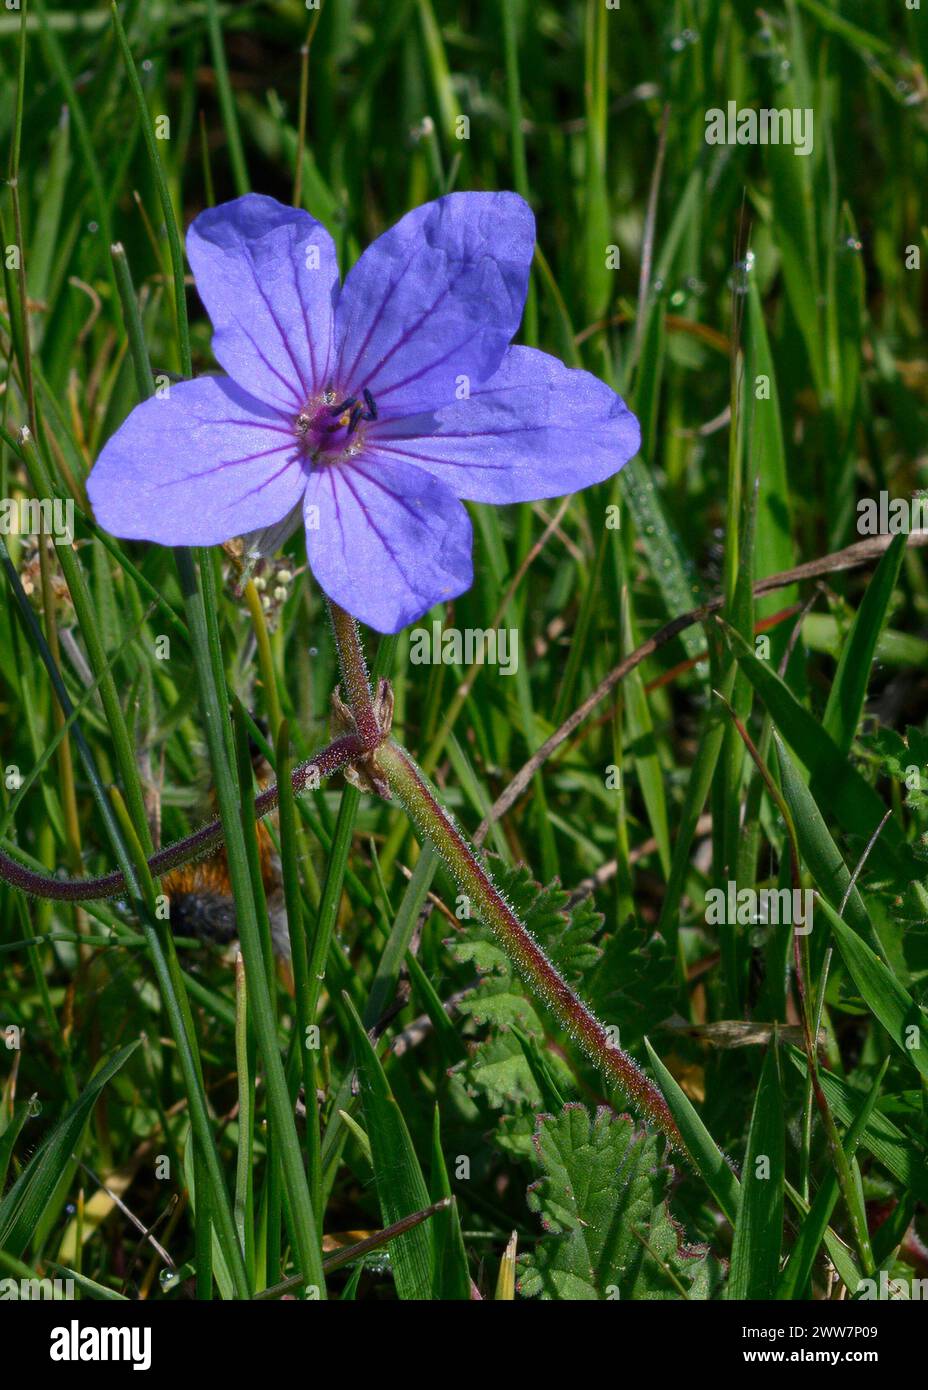 flowering Erodium ciconium common names hairy-pitted stork's-bill and shortfruit stork's bill. Photographed in the Jerusalem Hills, near Beit Shemesh, Stock Photo